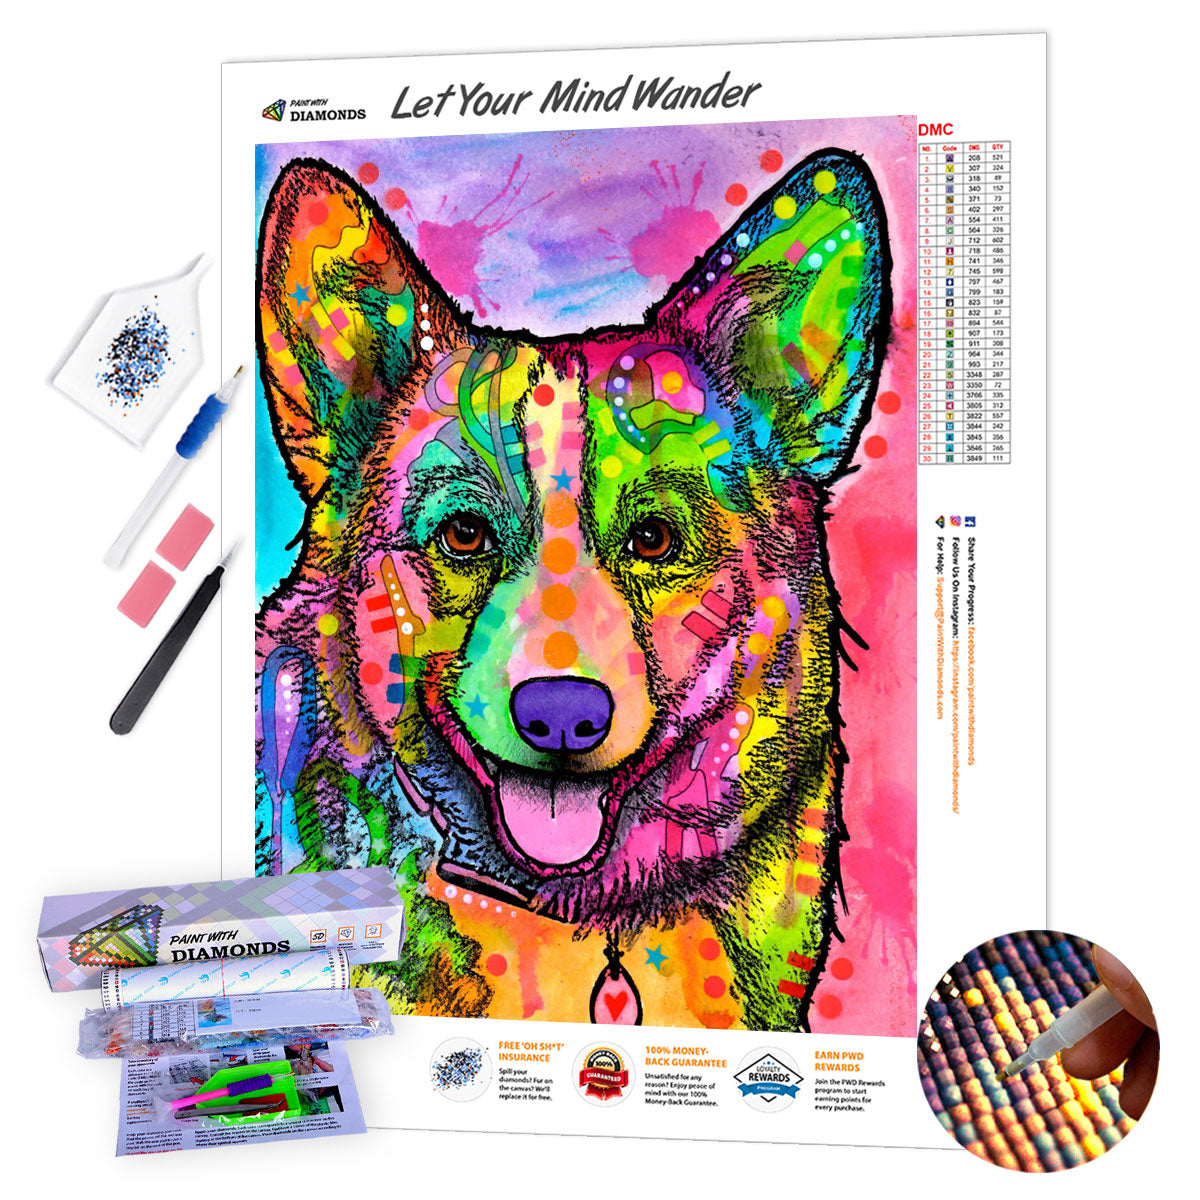  Adult Diamond Painting Kits - Love Swimming Corgi Full Diamond  Canvas Diamond Animal Art Painting, Stress Relief Artwork for Room Decor  Wall Decor, Colorful Healing Painting Style (12x18inch)